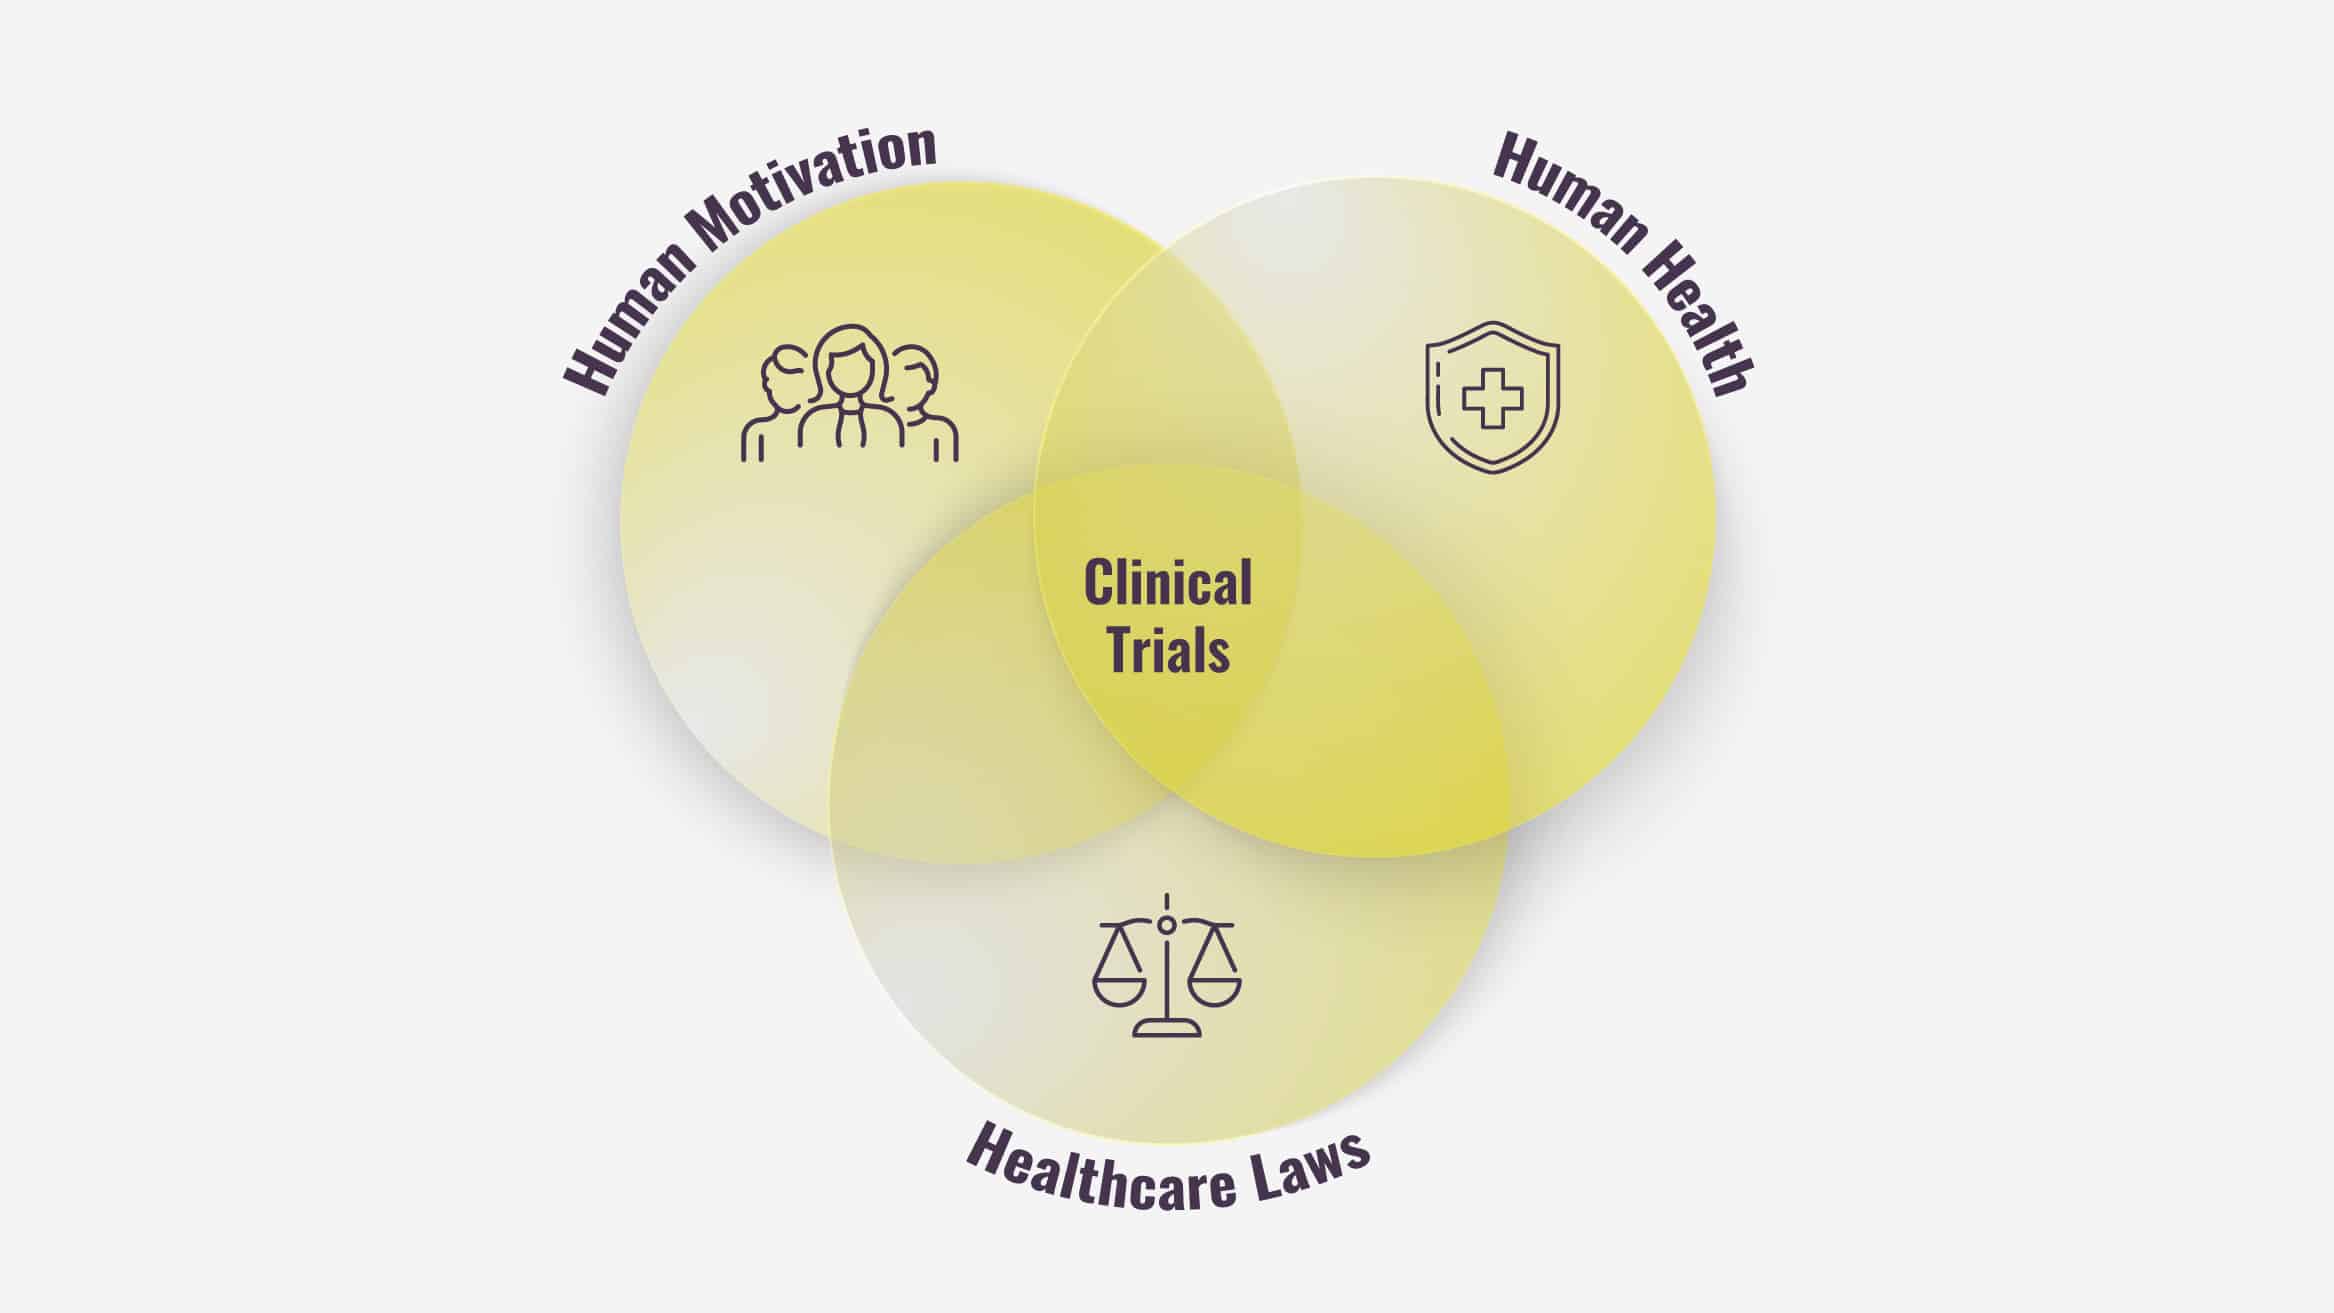 Why Clinical Trials are Complicated?